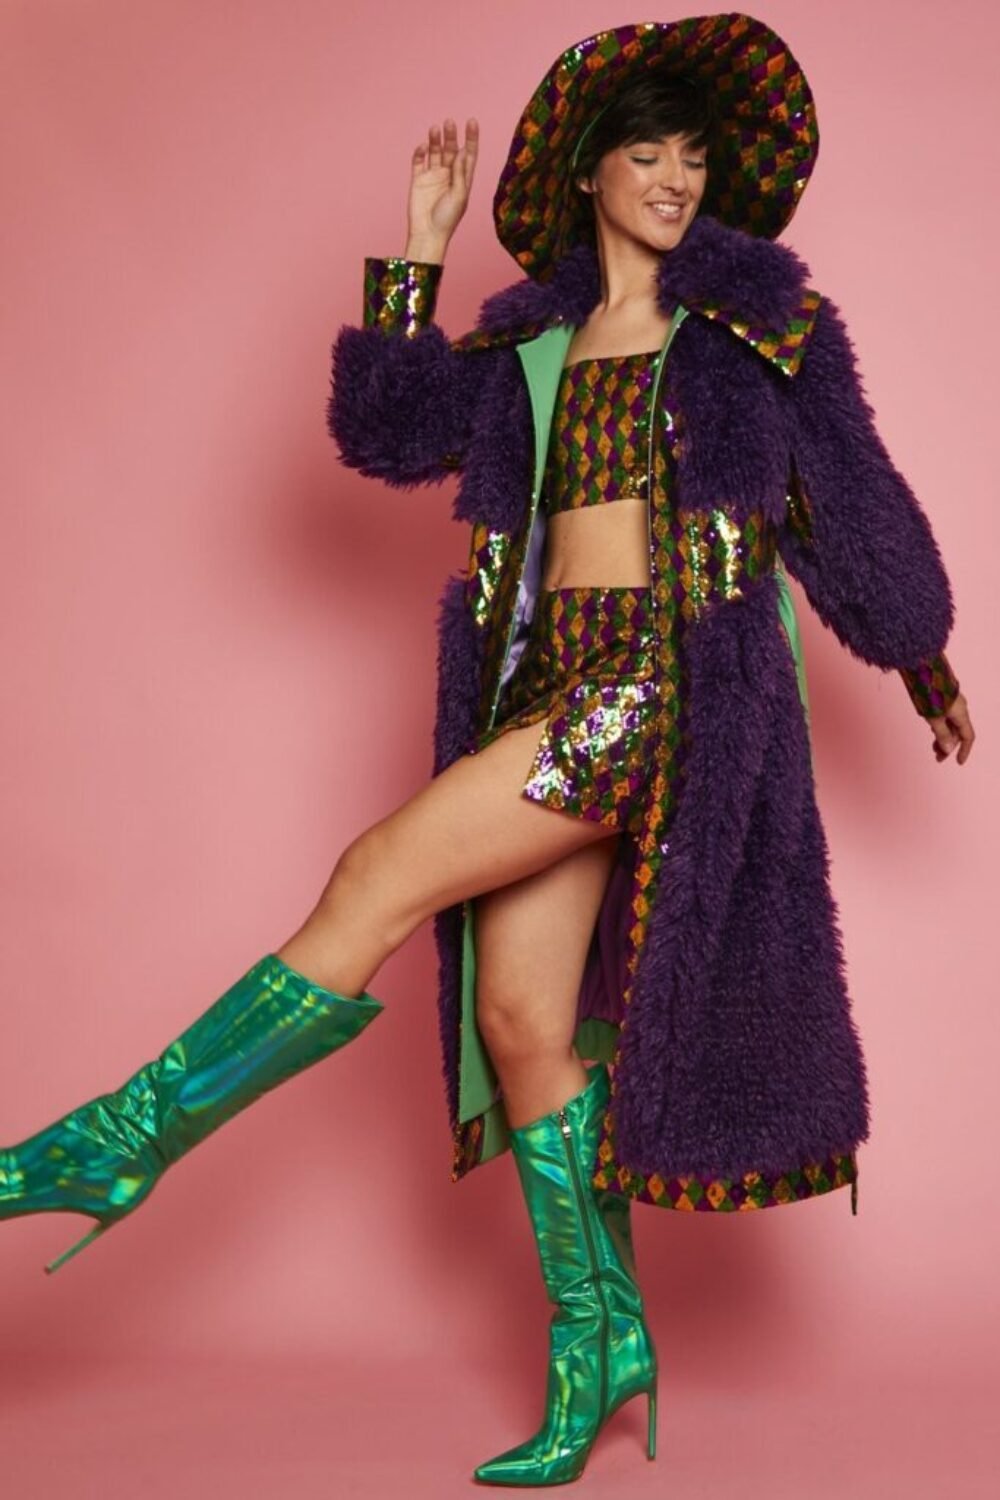 Shop Lux Purple Knitted Bamboo Eco Mongolian Coat and women's luxury and designer clothes at www.lux-apparel.co.uk